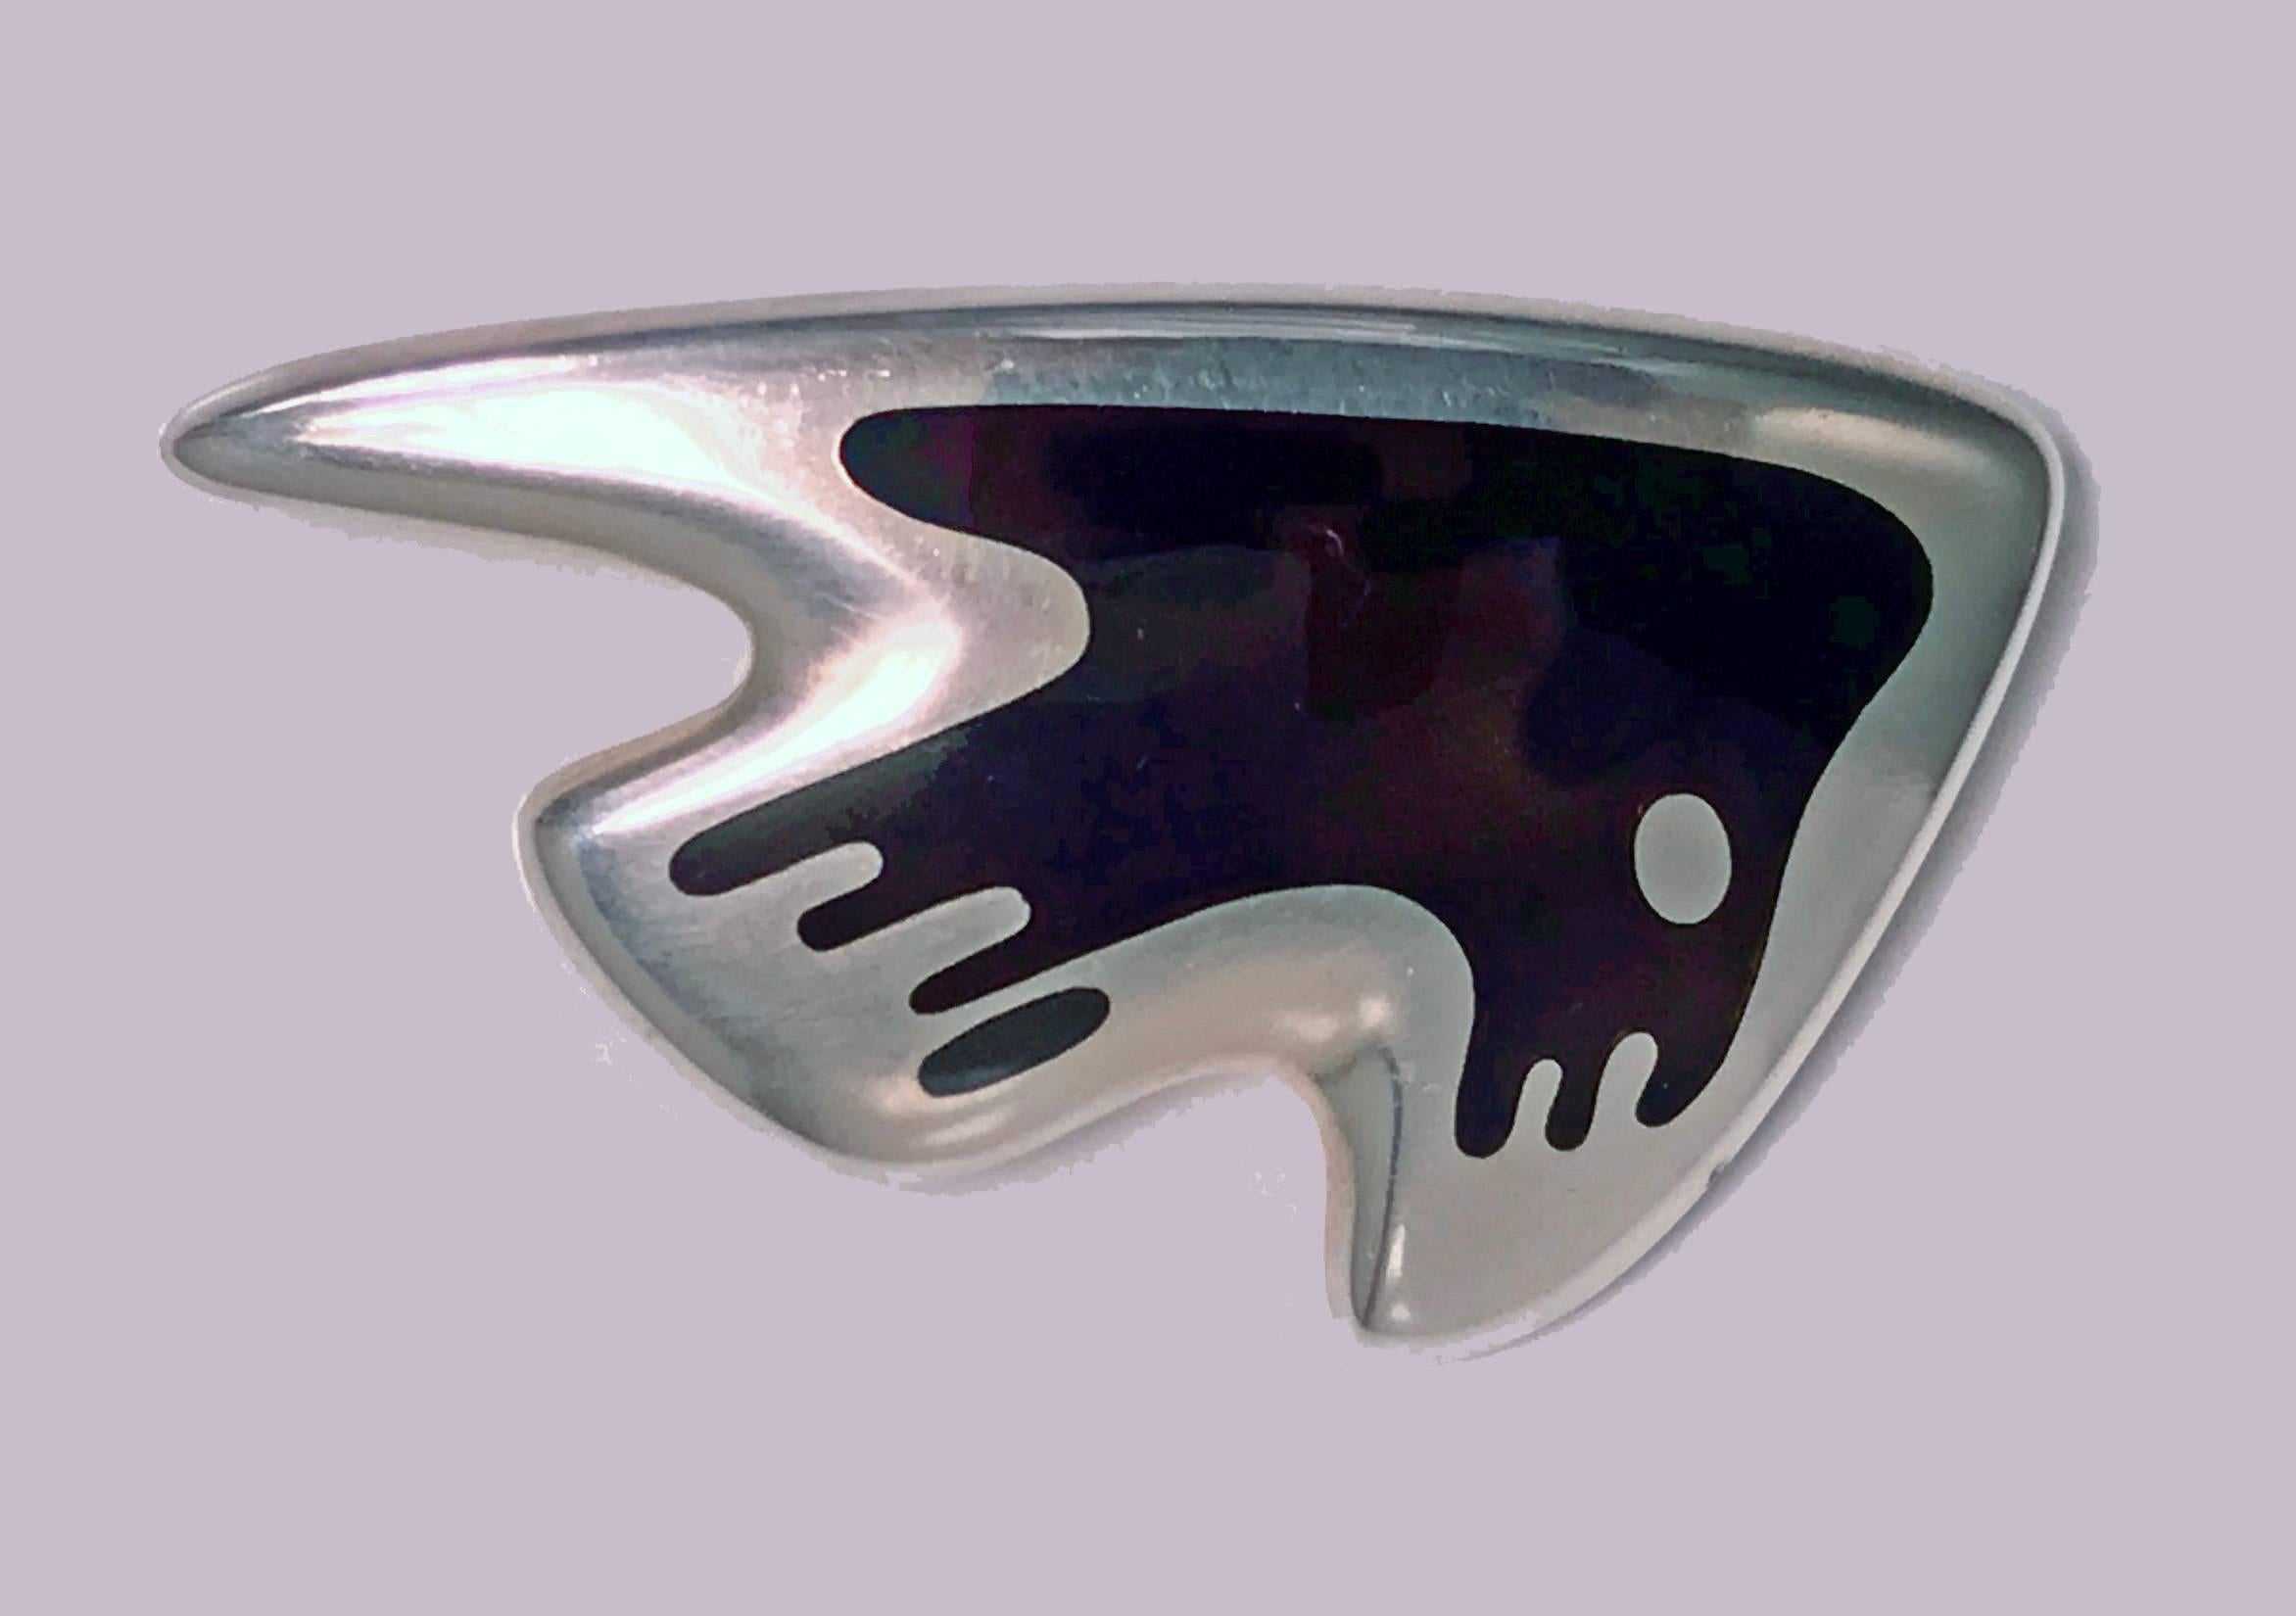 Georg Jensen Henning Koppel abstract sculptural enamel and sterling Brooch, Denmark, C.1947. The Brooch of sculptural abstract form, two tone enamel. Full marks to reverse and HK for Henning Koppel and numbered 307. See pp 118 Georg Jensen Jewelry.